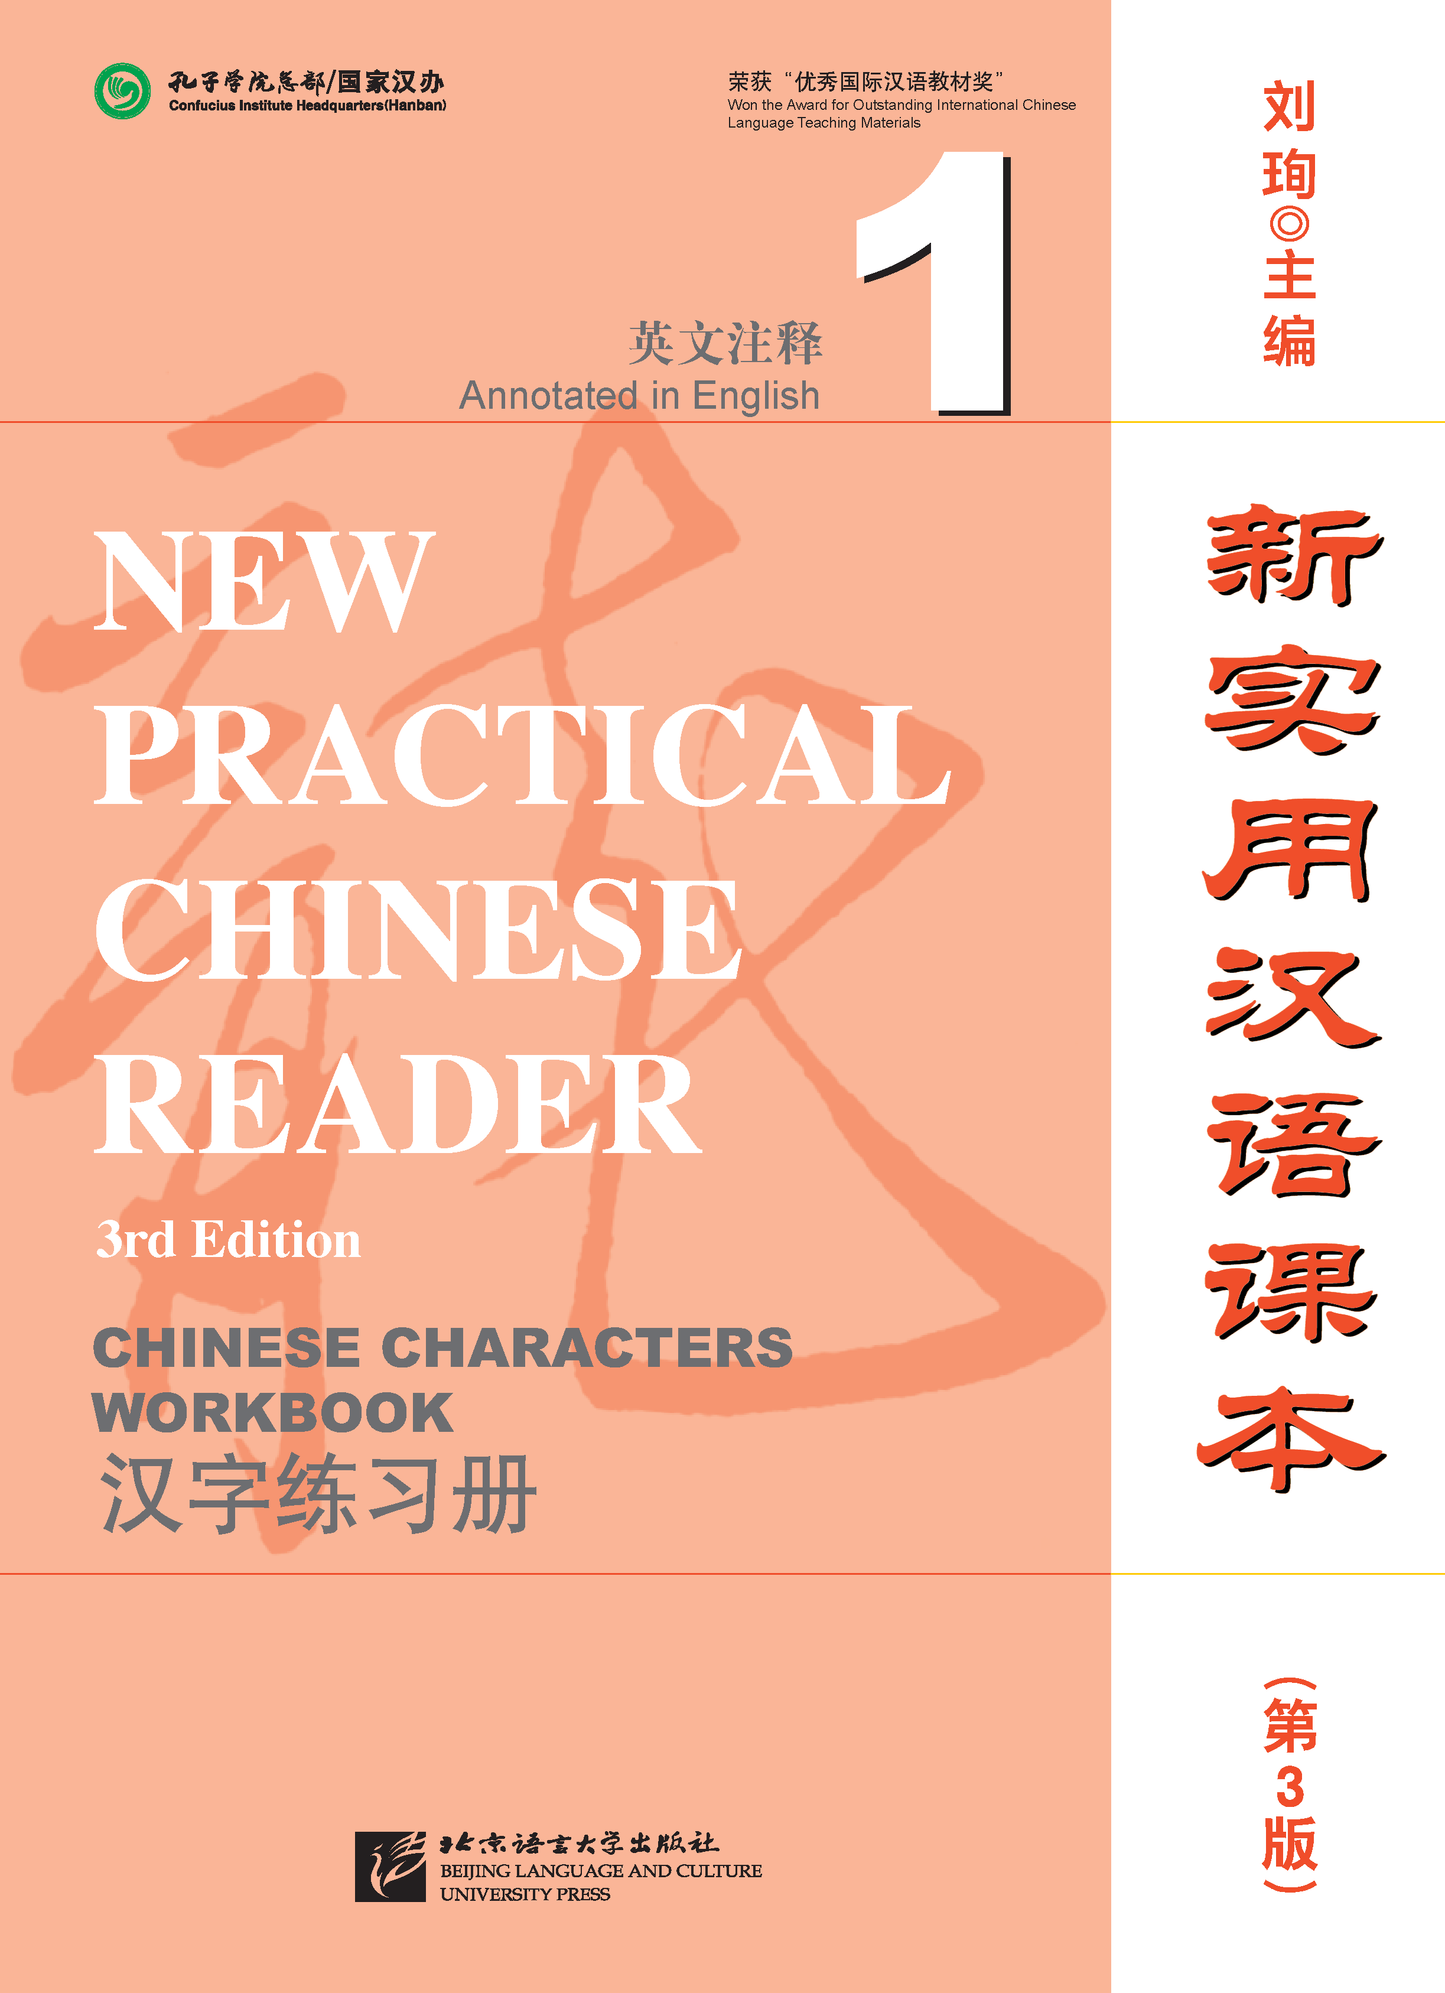 New Practical Chinese Reader Vol. 1 - Chinese Characters Workbook (3rd Edition)